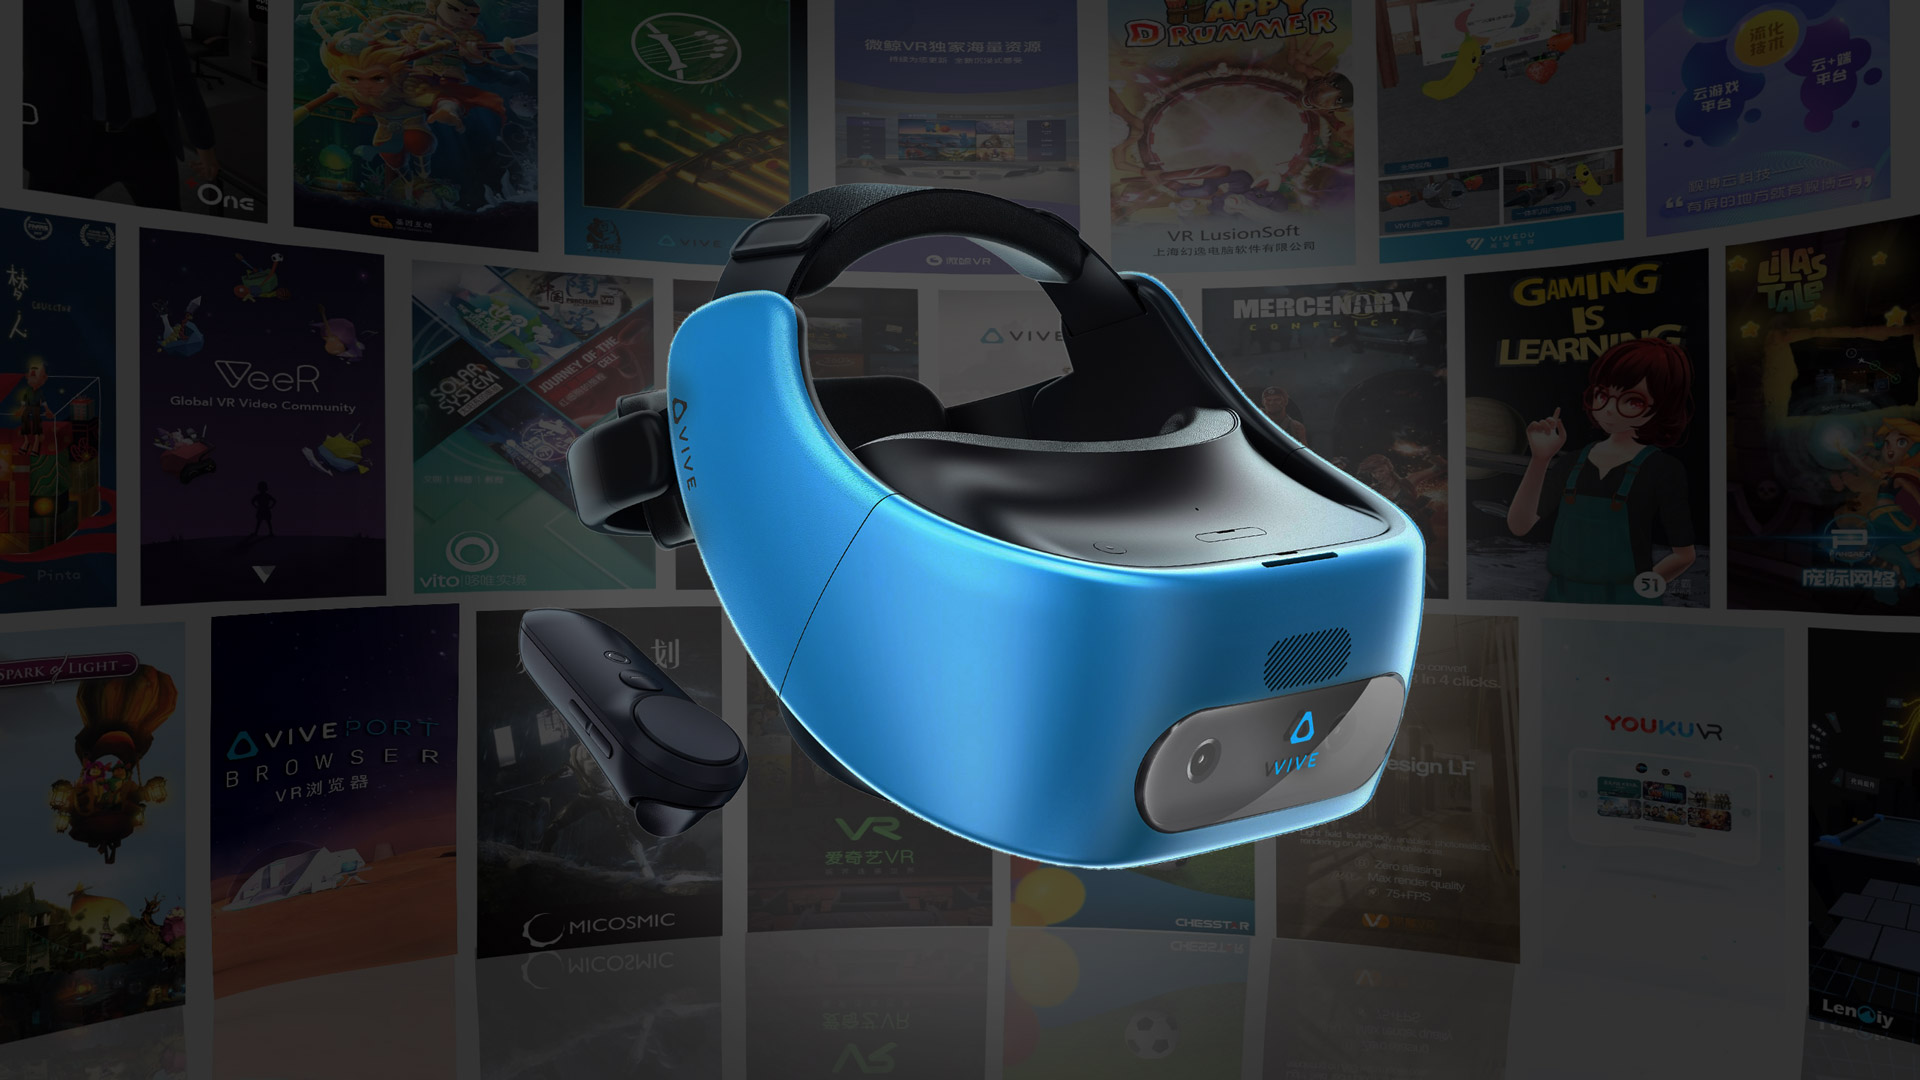 Vive Focus Standalone VR Headset Launches in China - Road to VR